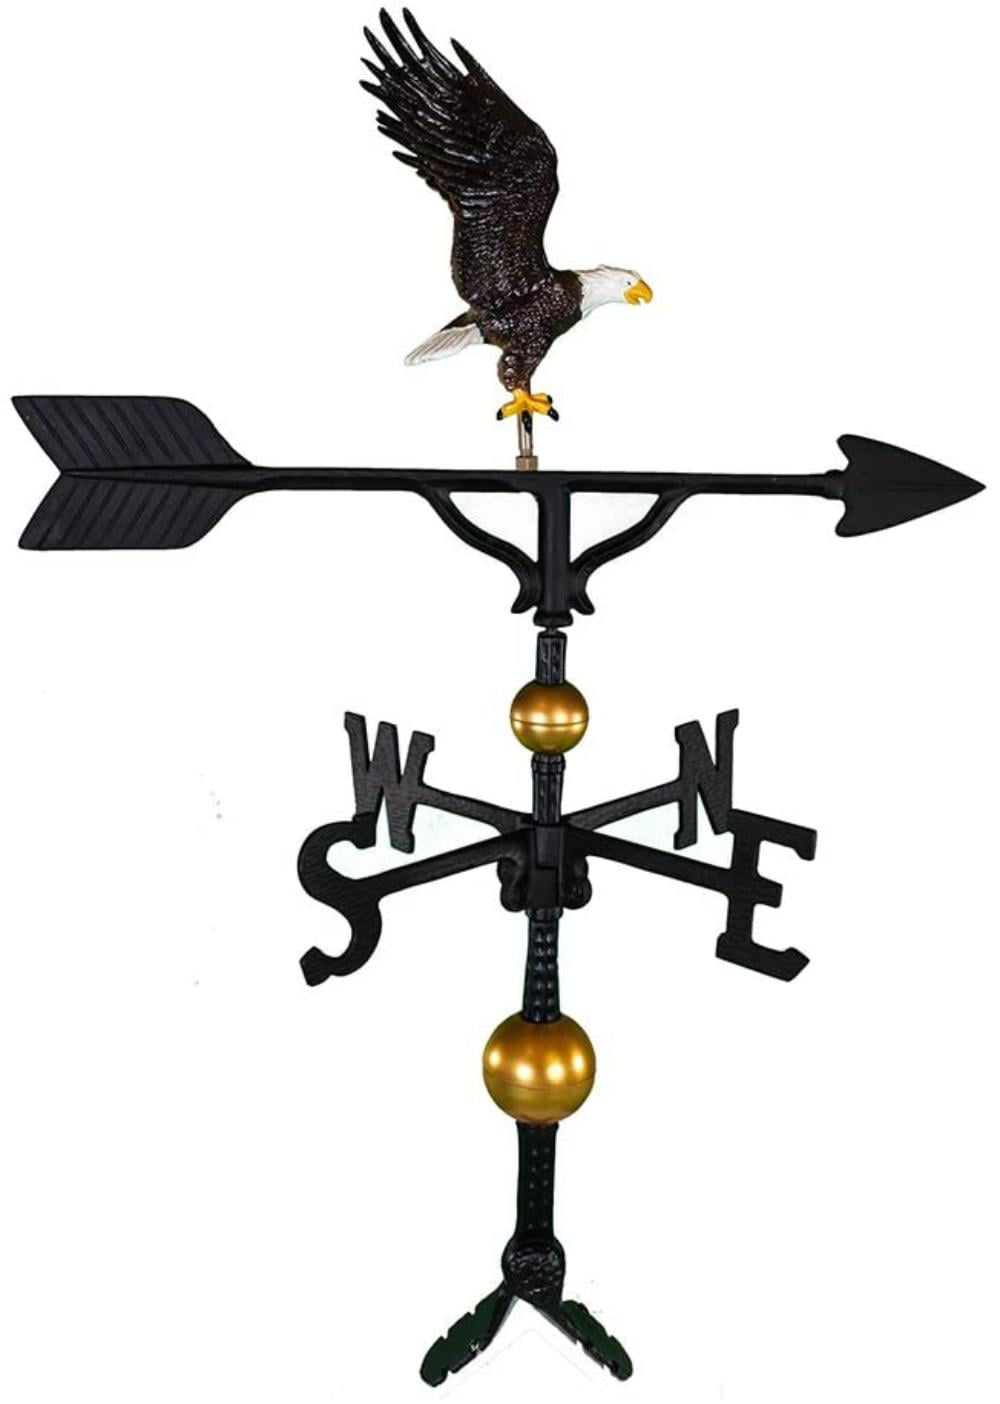 Montague Metal Products 32-Inch Weathervane with Color Rooster Ornament